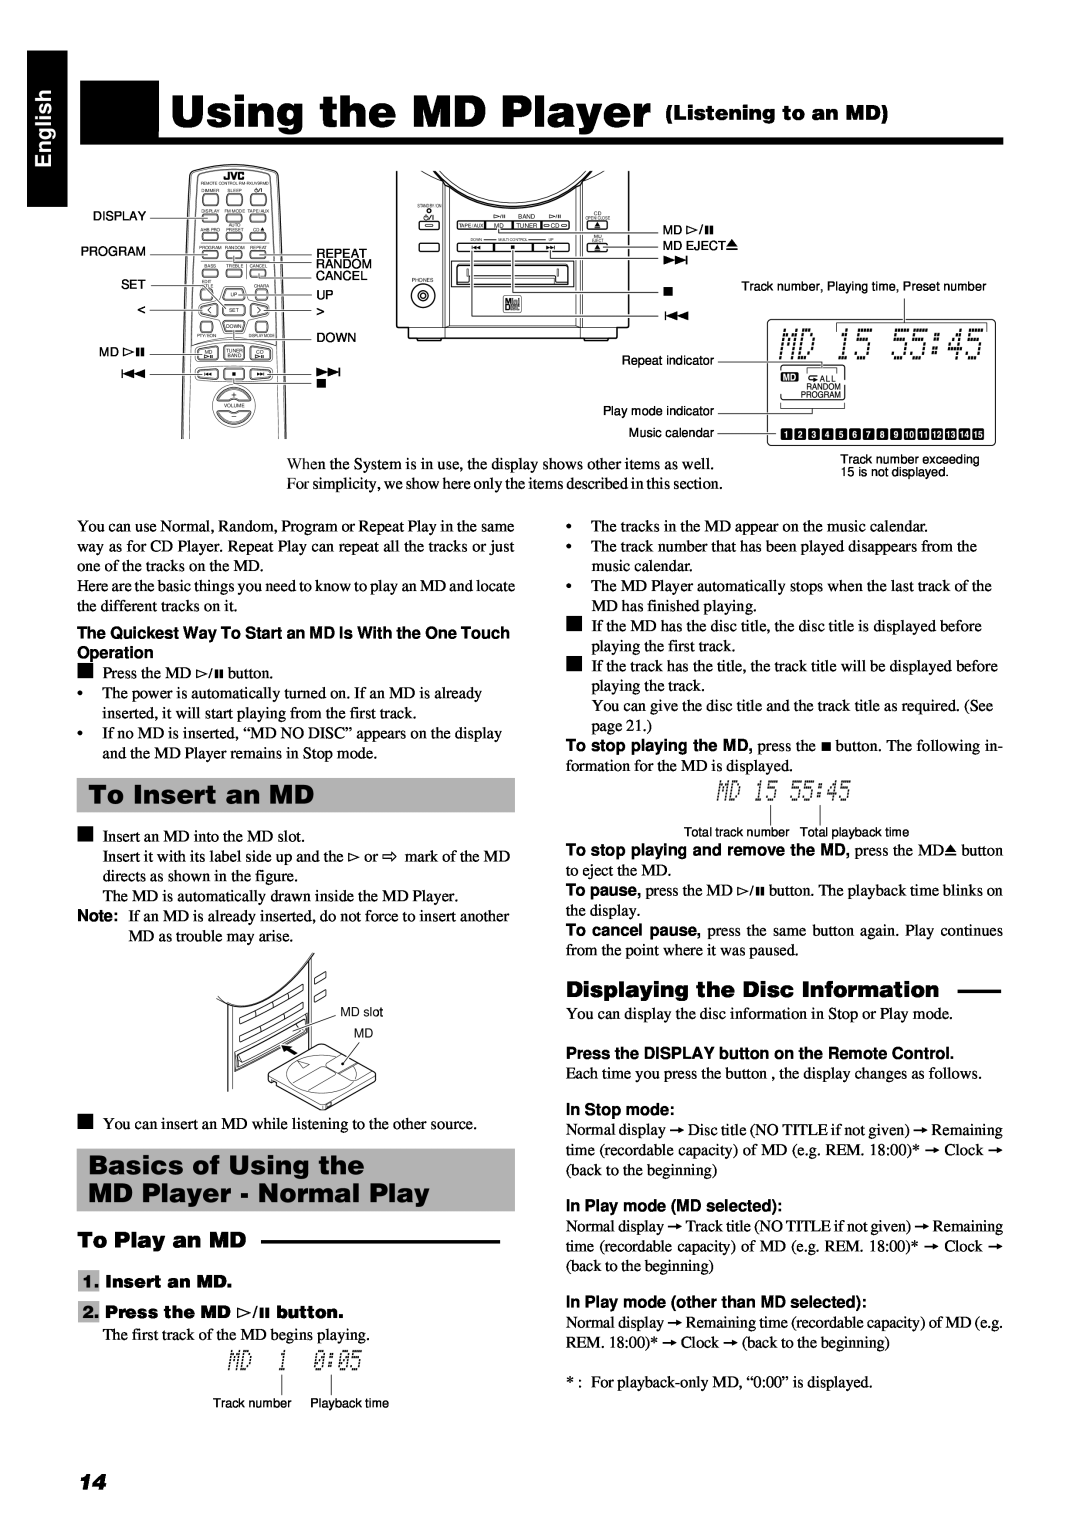 JVC RM-RXUV9RMD manual Using the MD Player Listening to an MD, To Insert an MD, Basics of Using the MD Player - Normal Play 